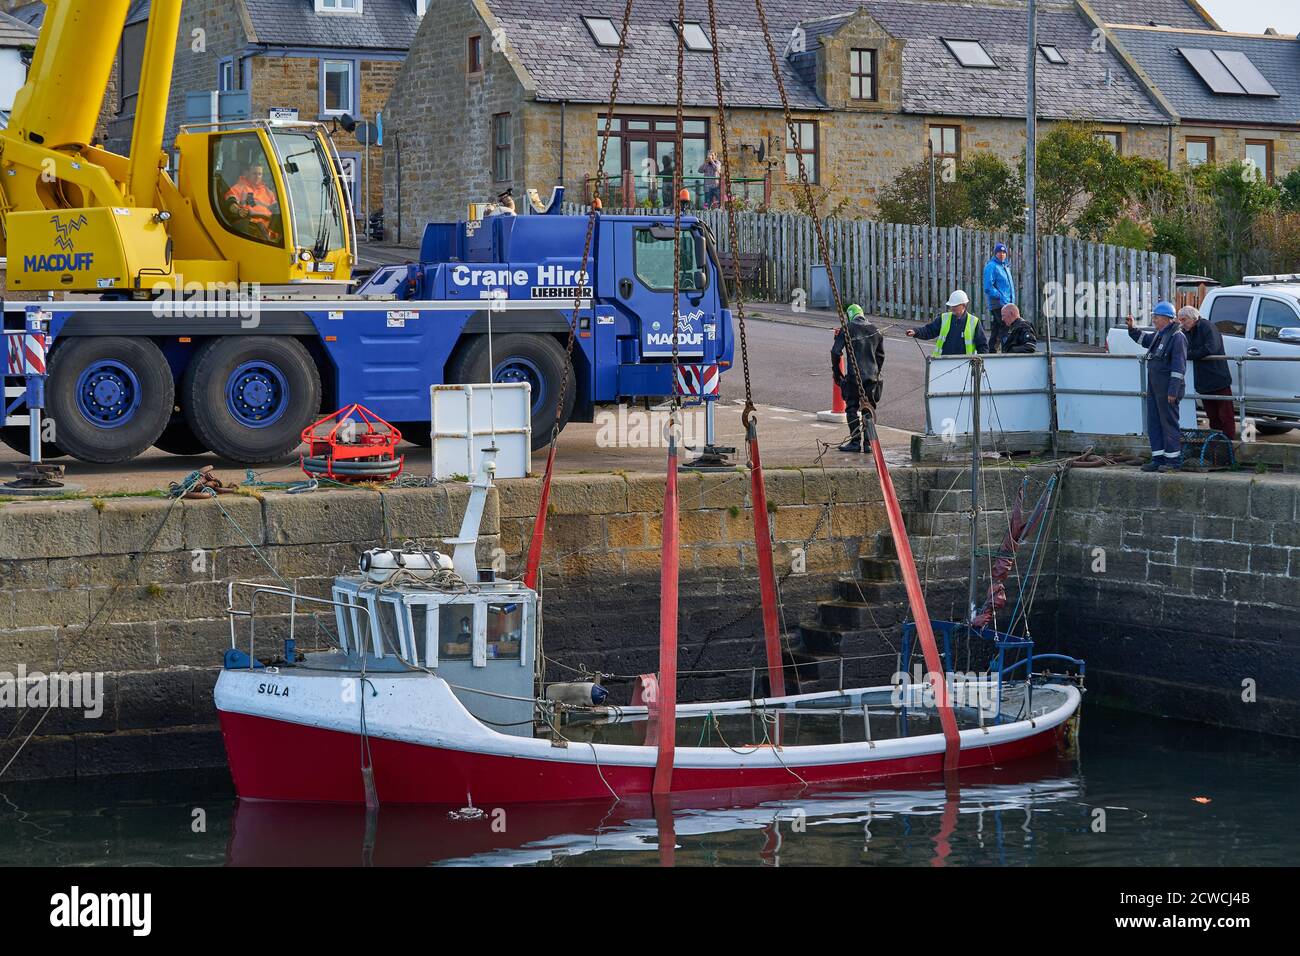 Burghead Harbour, Moray, UK. 29th Sep, 2020. UK. This is the small fishing boat Sula which sank due to a faulty valve system within the Harbour 27/28 Sep. This shows it being recovered from the depths by using a Crane and Divers. Credit: JASPERIMAGE/Alamy Live News Stock Photo